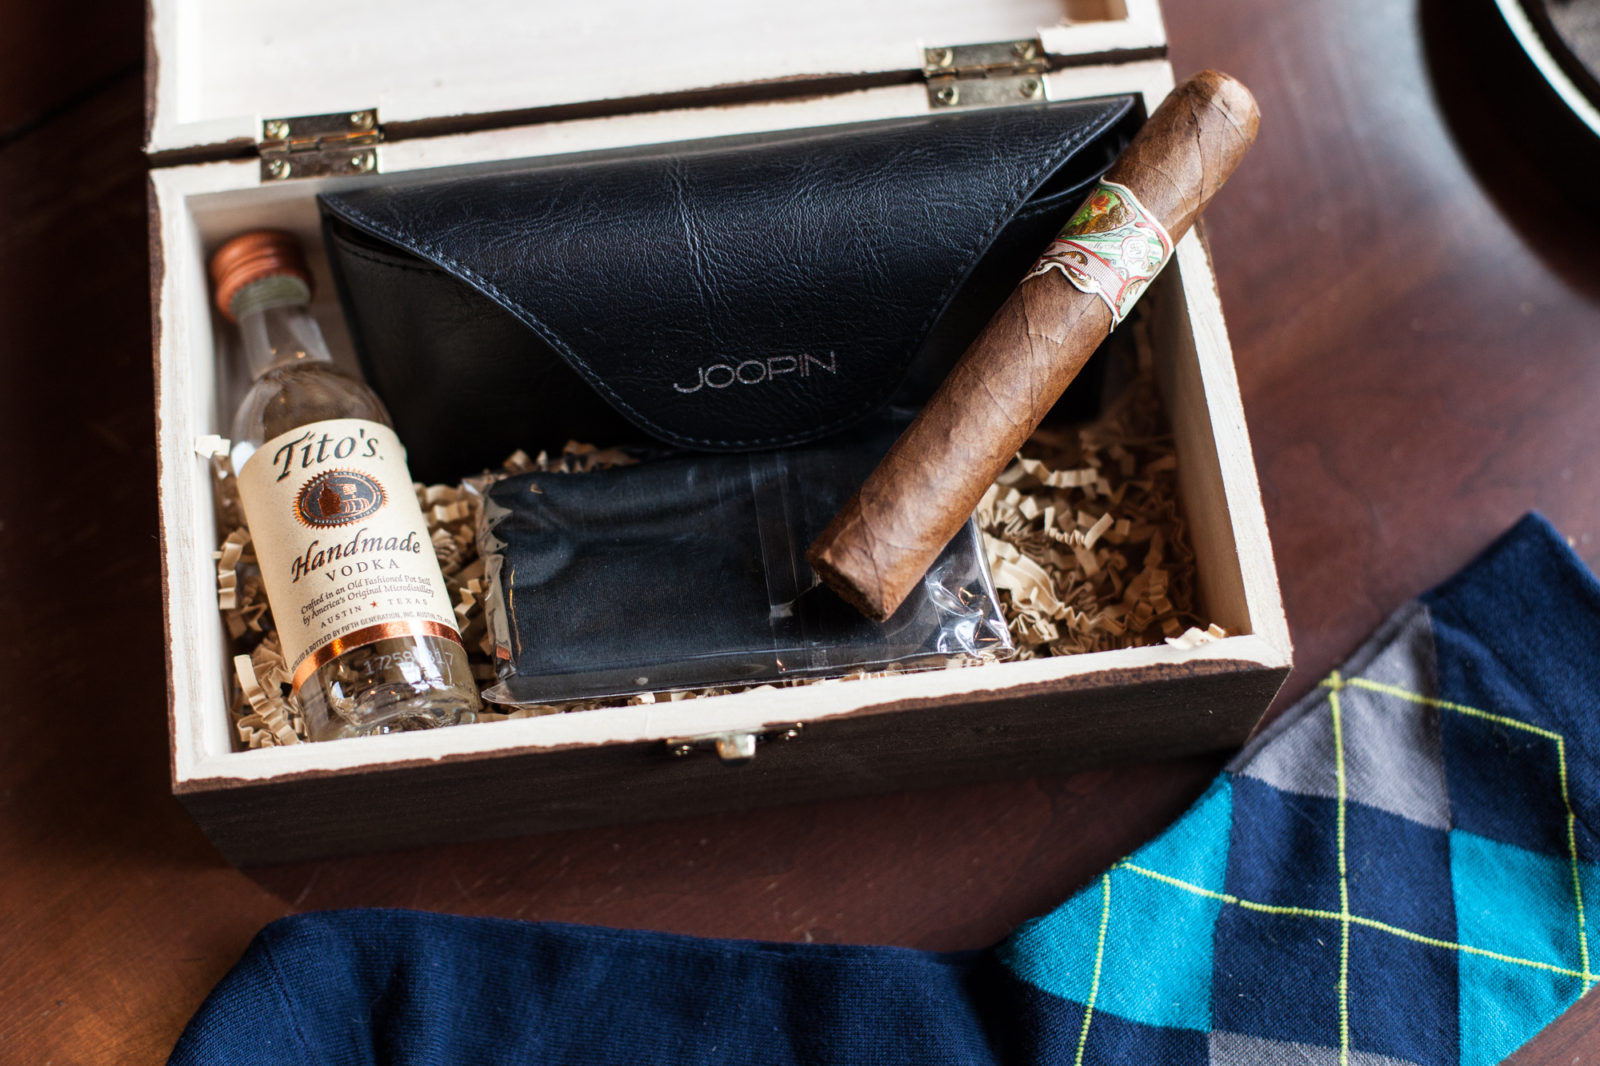 groomsmens gifts with cigar socks mini alcohol bottle